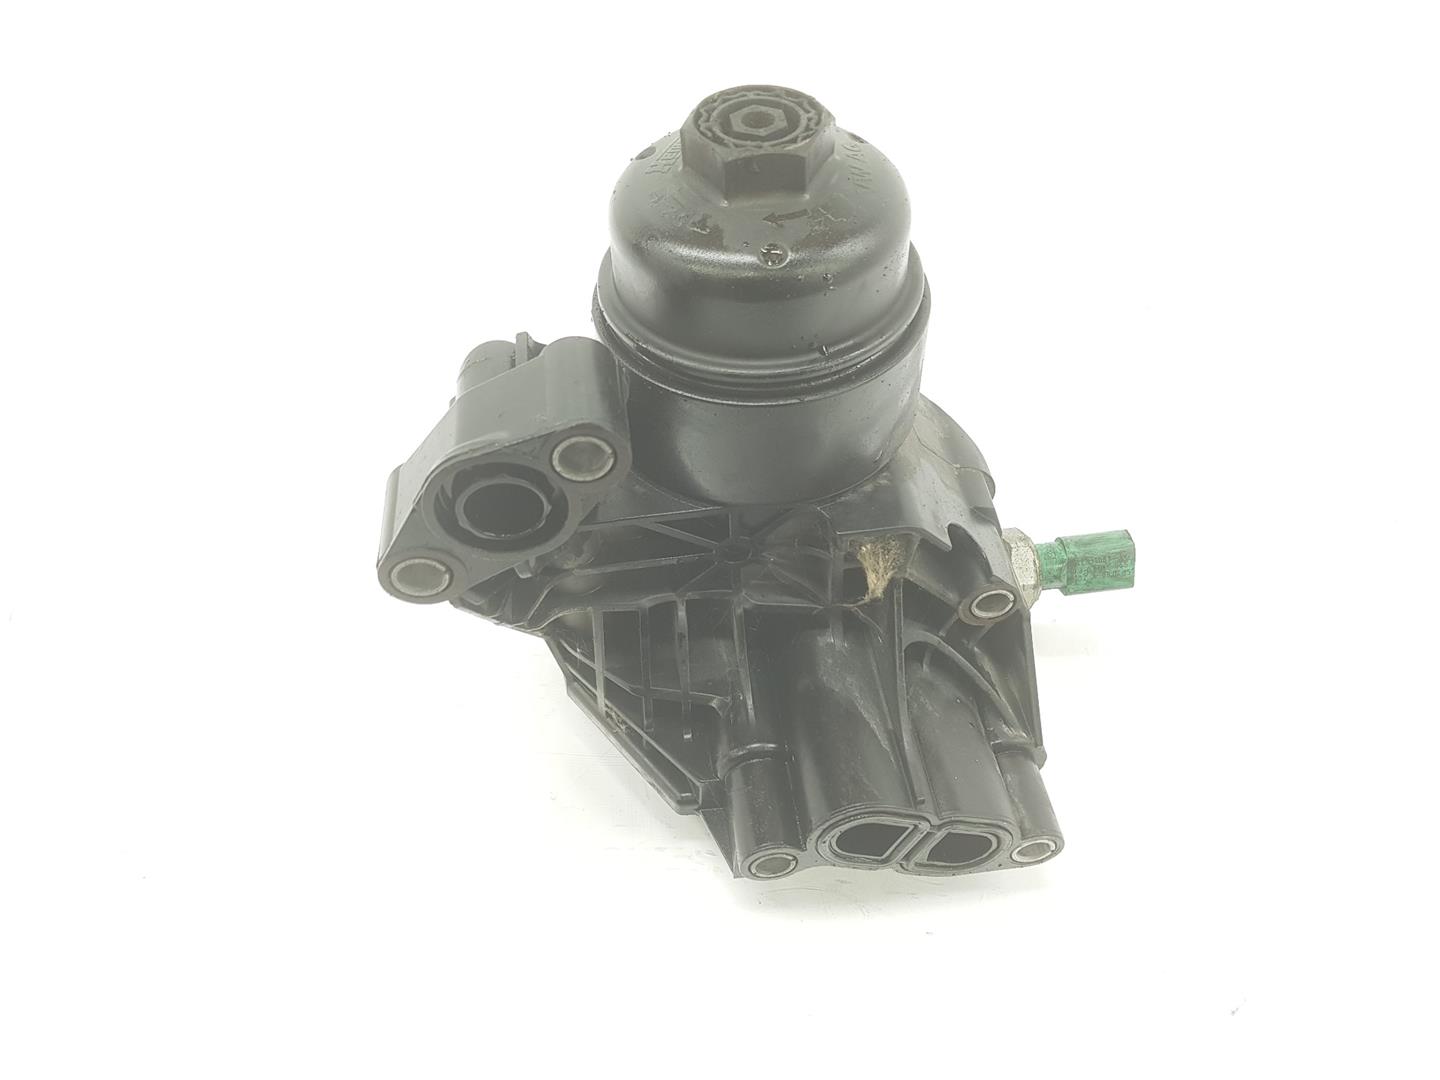 SEAT Leon 3 generation (2012-2020) Other Engine Compartment Parts 03N115389A, 03N115389A 19880248